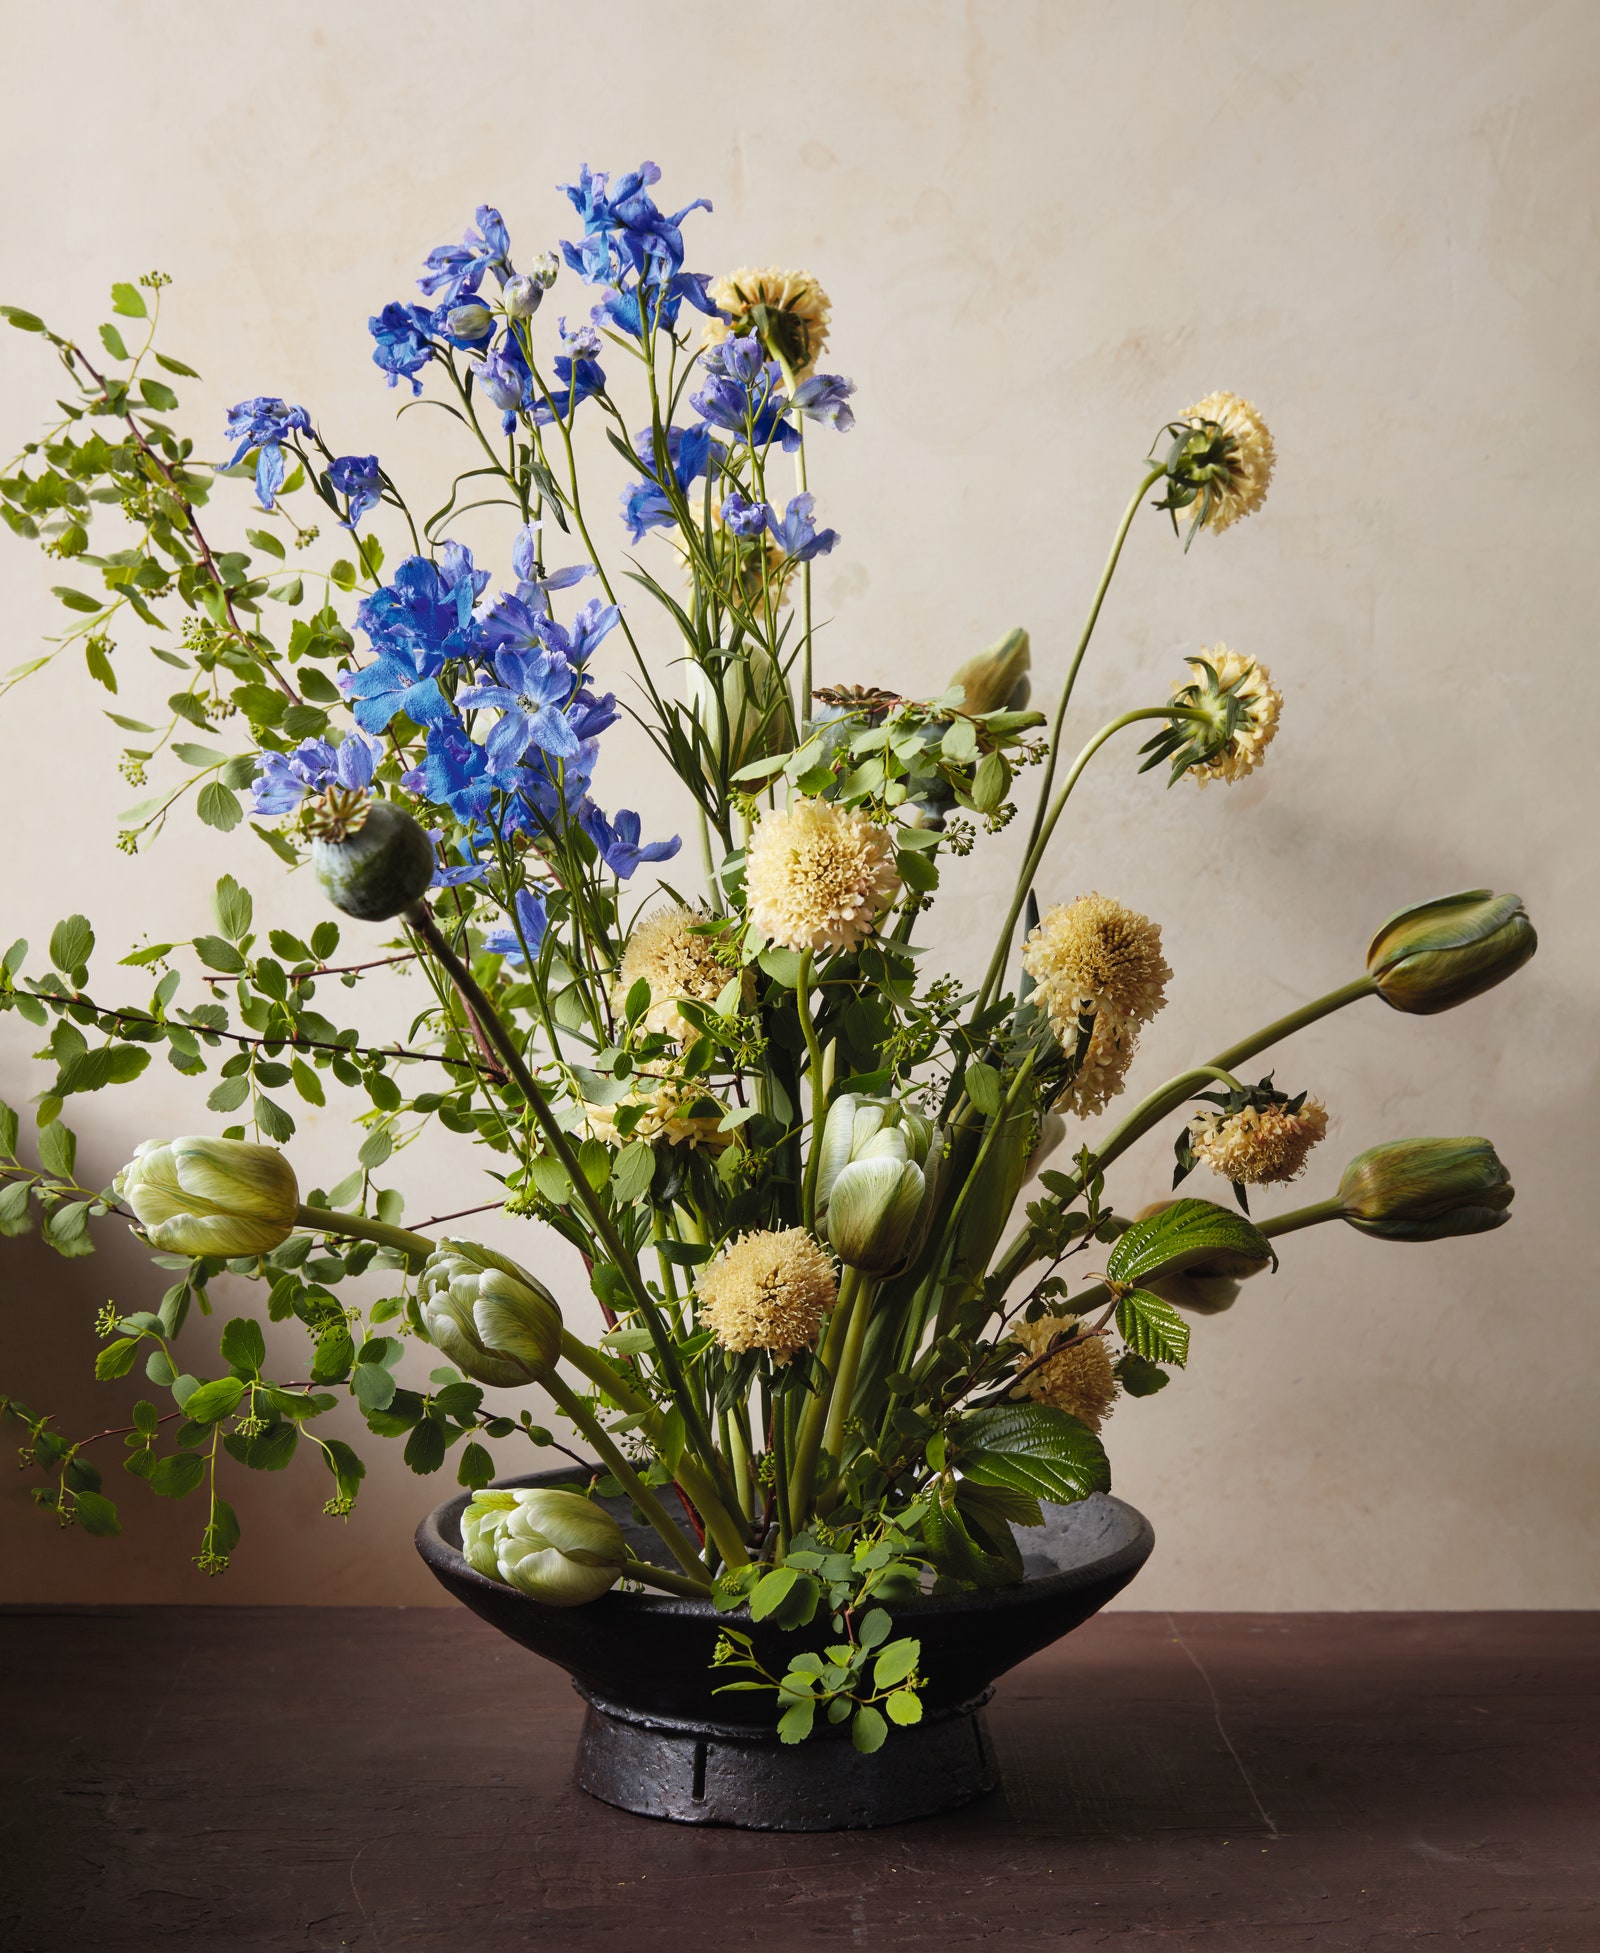 Taylor was inspired by the vivid sky small foliage and flinty rocks of the Bellini to cluster green tulips and blue...